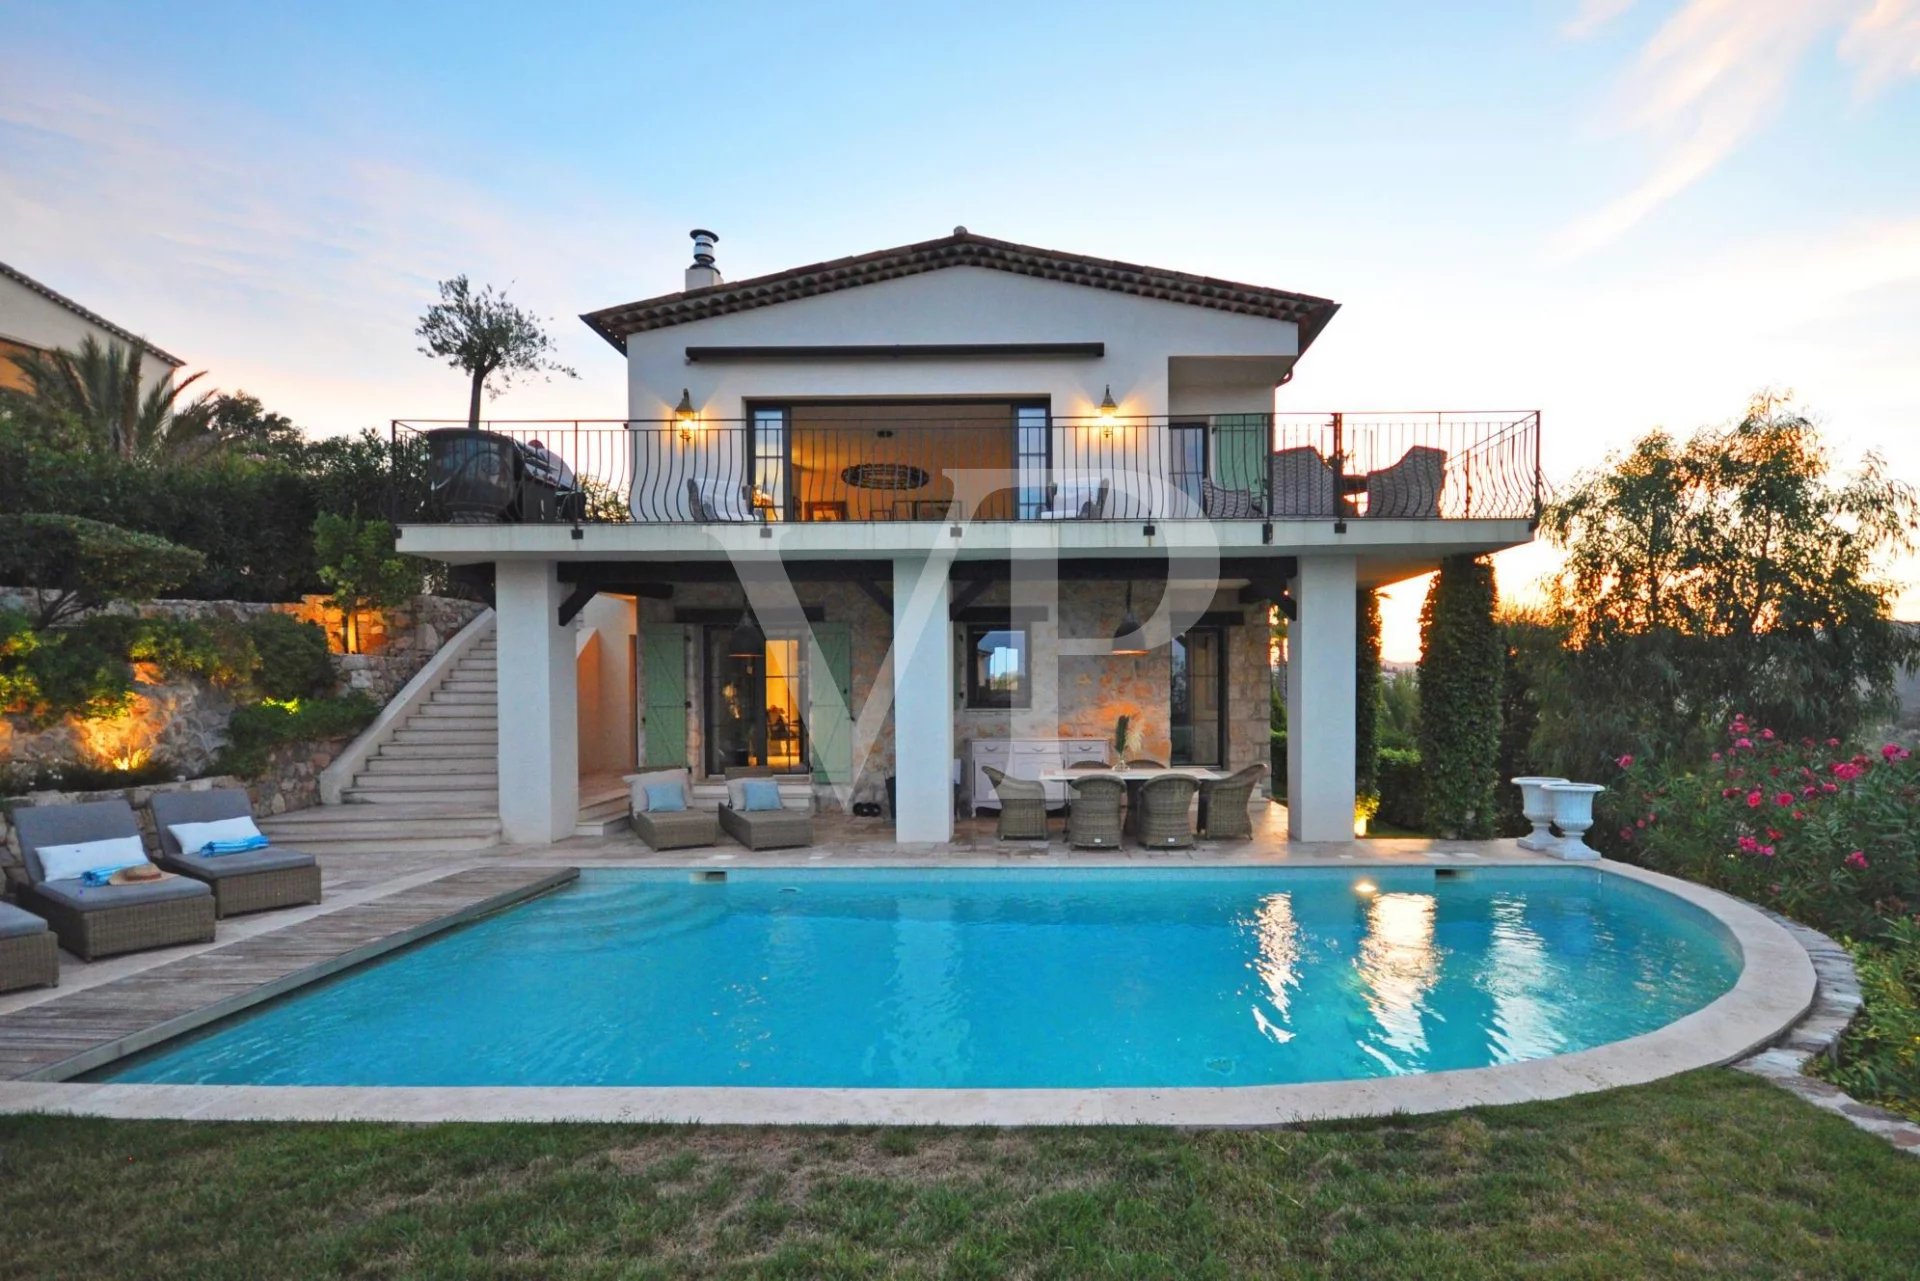 Villa with magical sea views within walking distance from the village